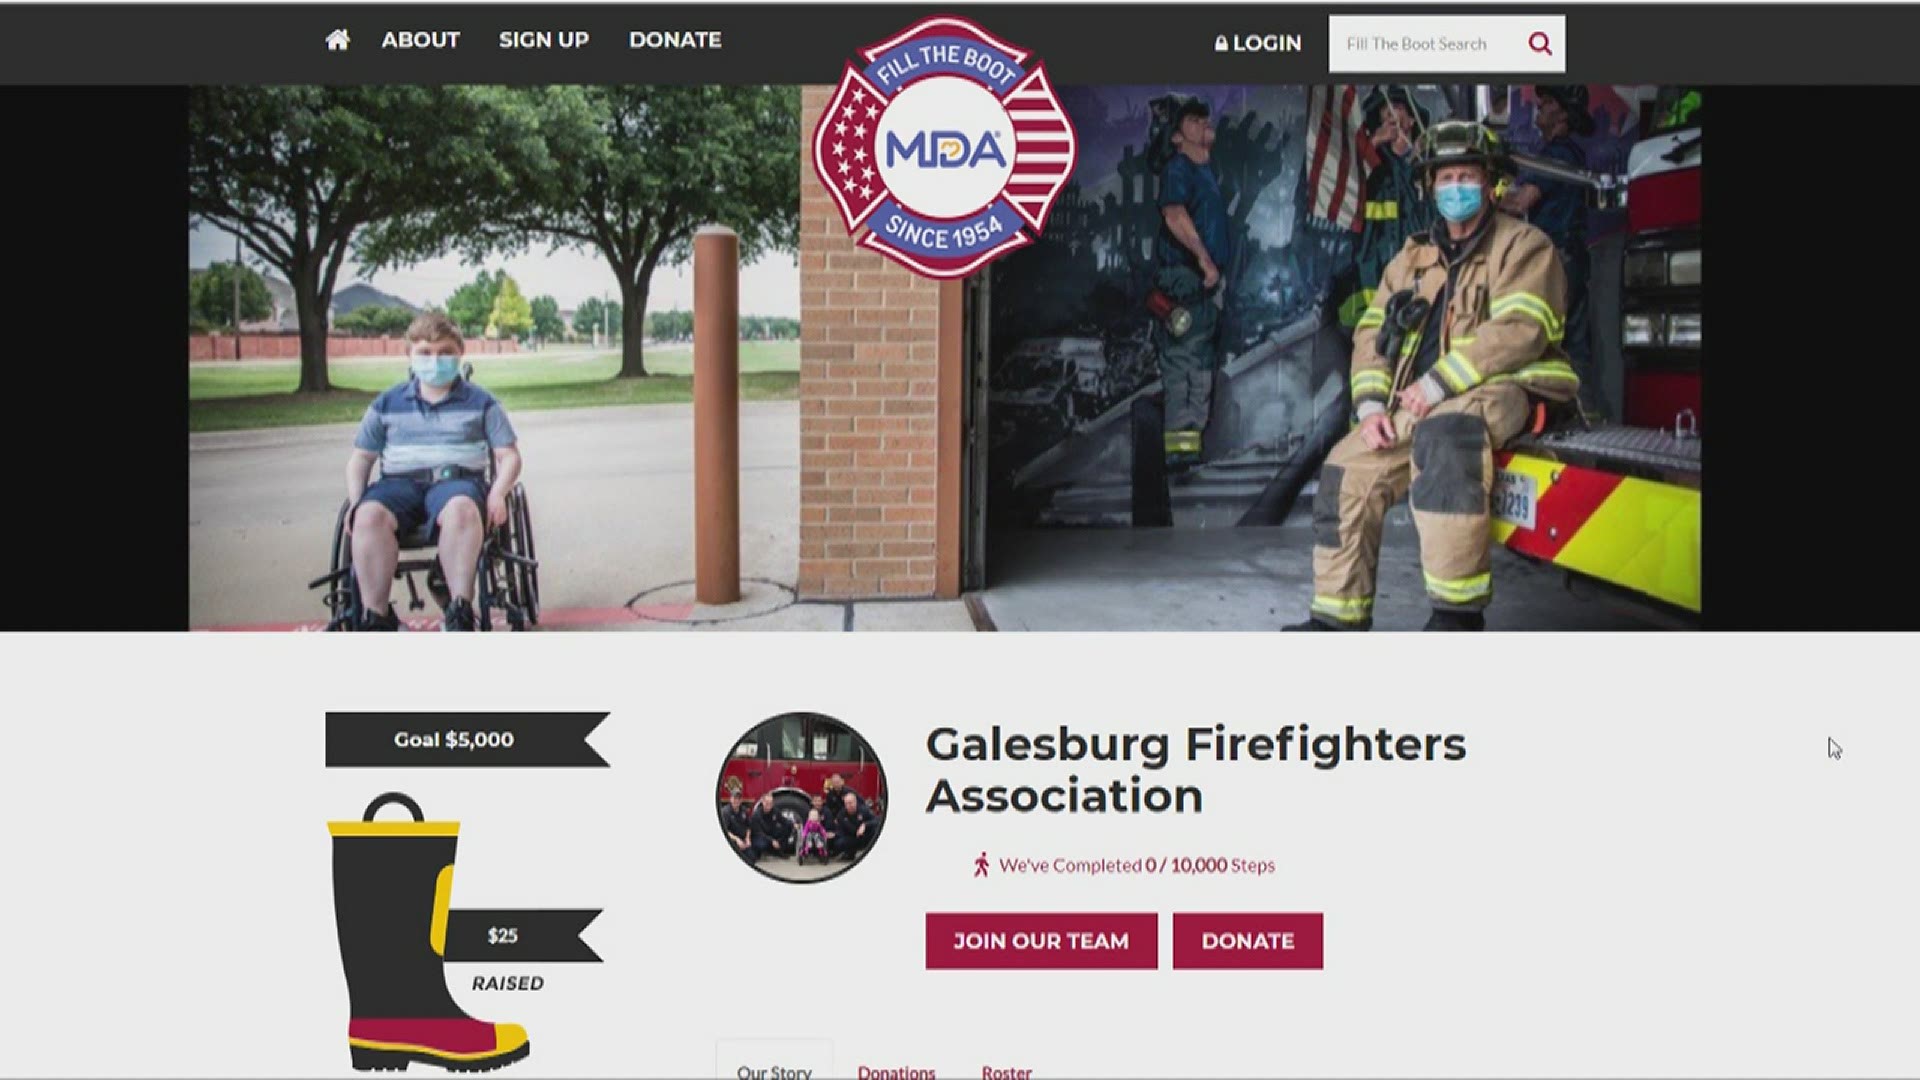 Firefighters have found a way to continue to raise money for the Muscular Dystrophy Association, despite the COVID-19 pandemic.